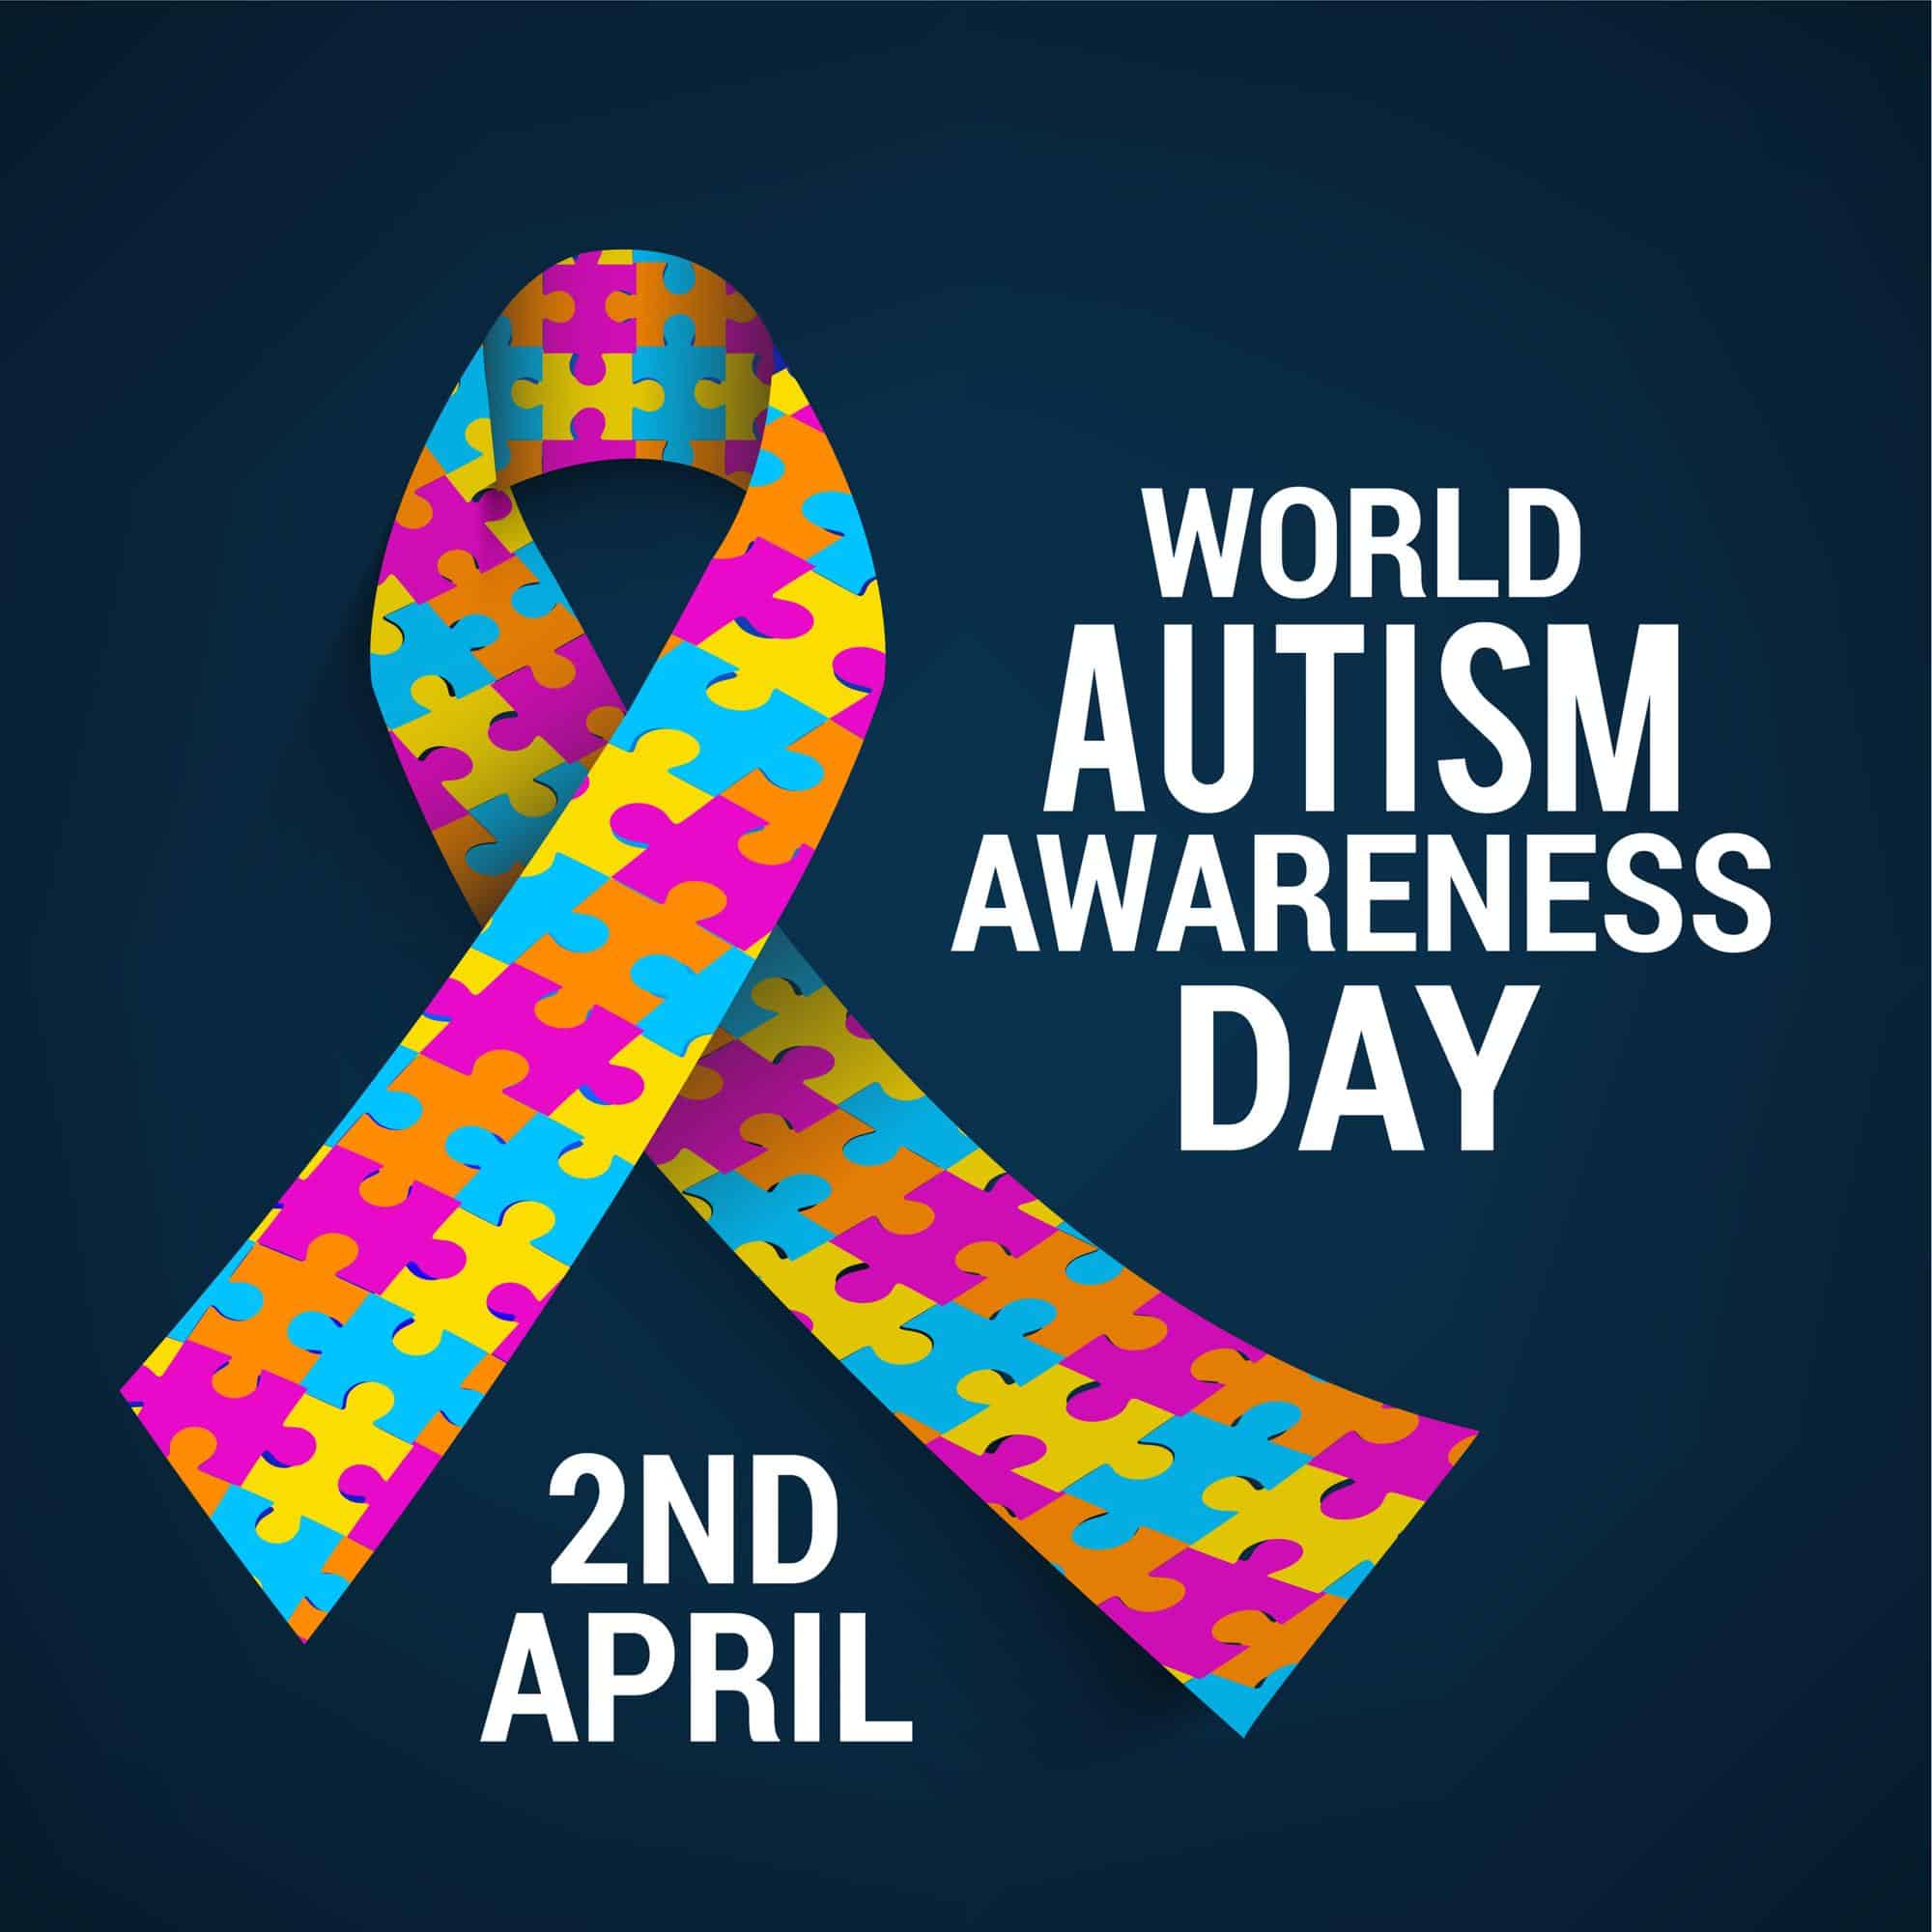 World Autism Awareness Day 2020: when is it, whats this year